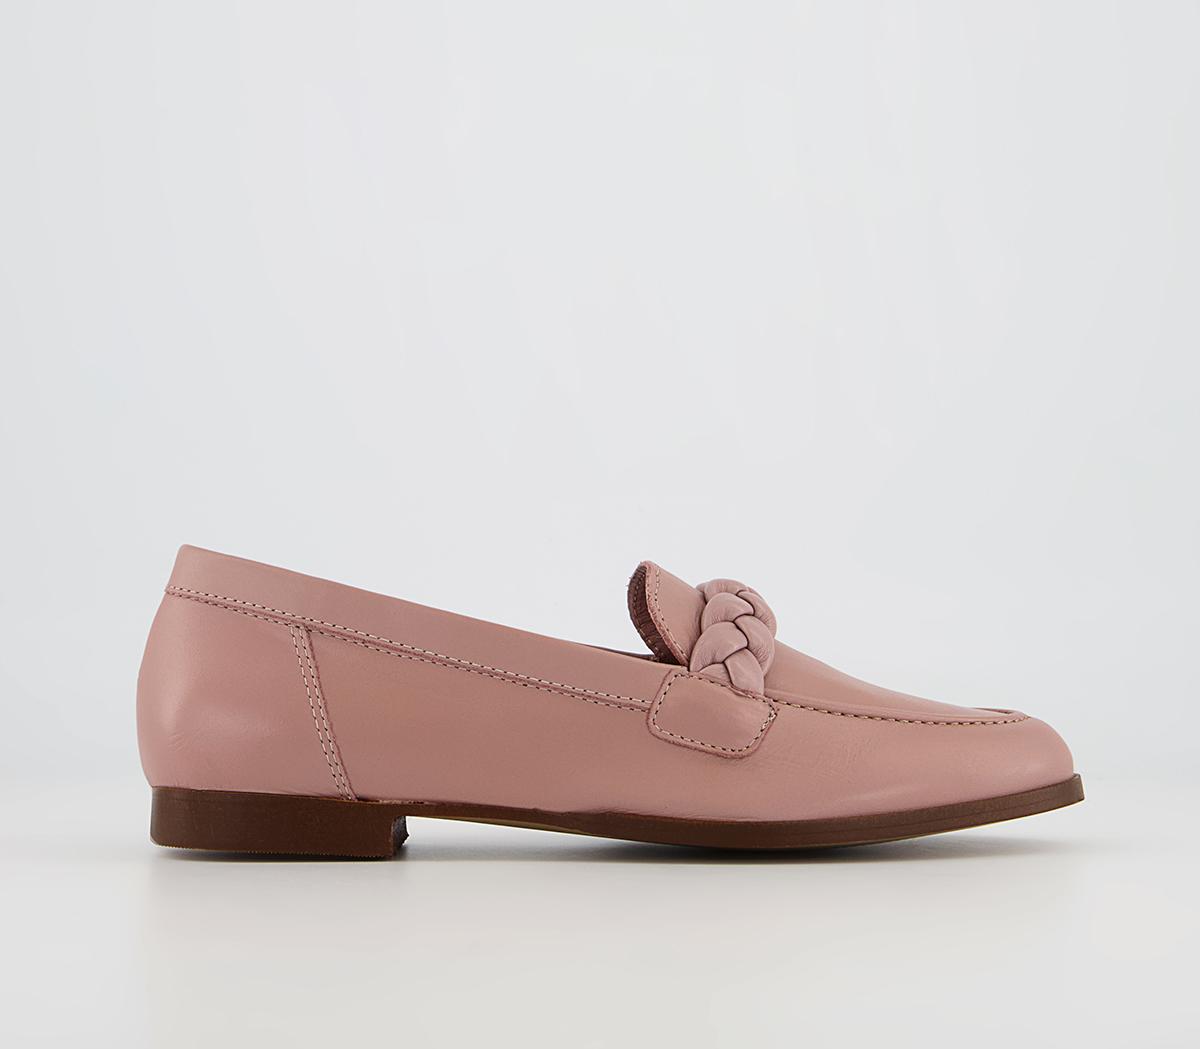 OFFICE Flourishing Plaited Loafers Pale Pink Leather - Flat Shoes for Women